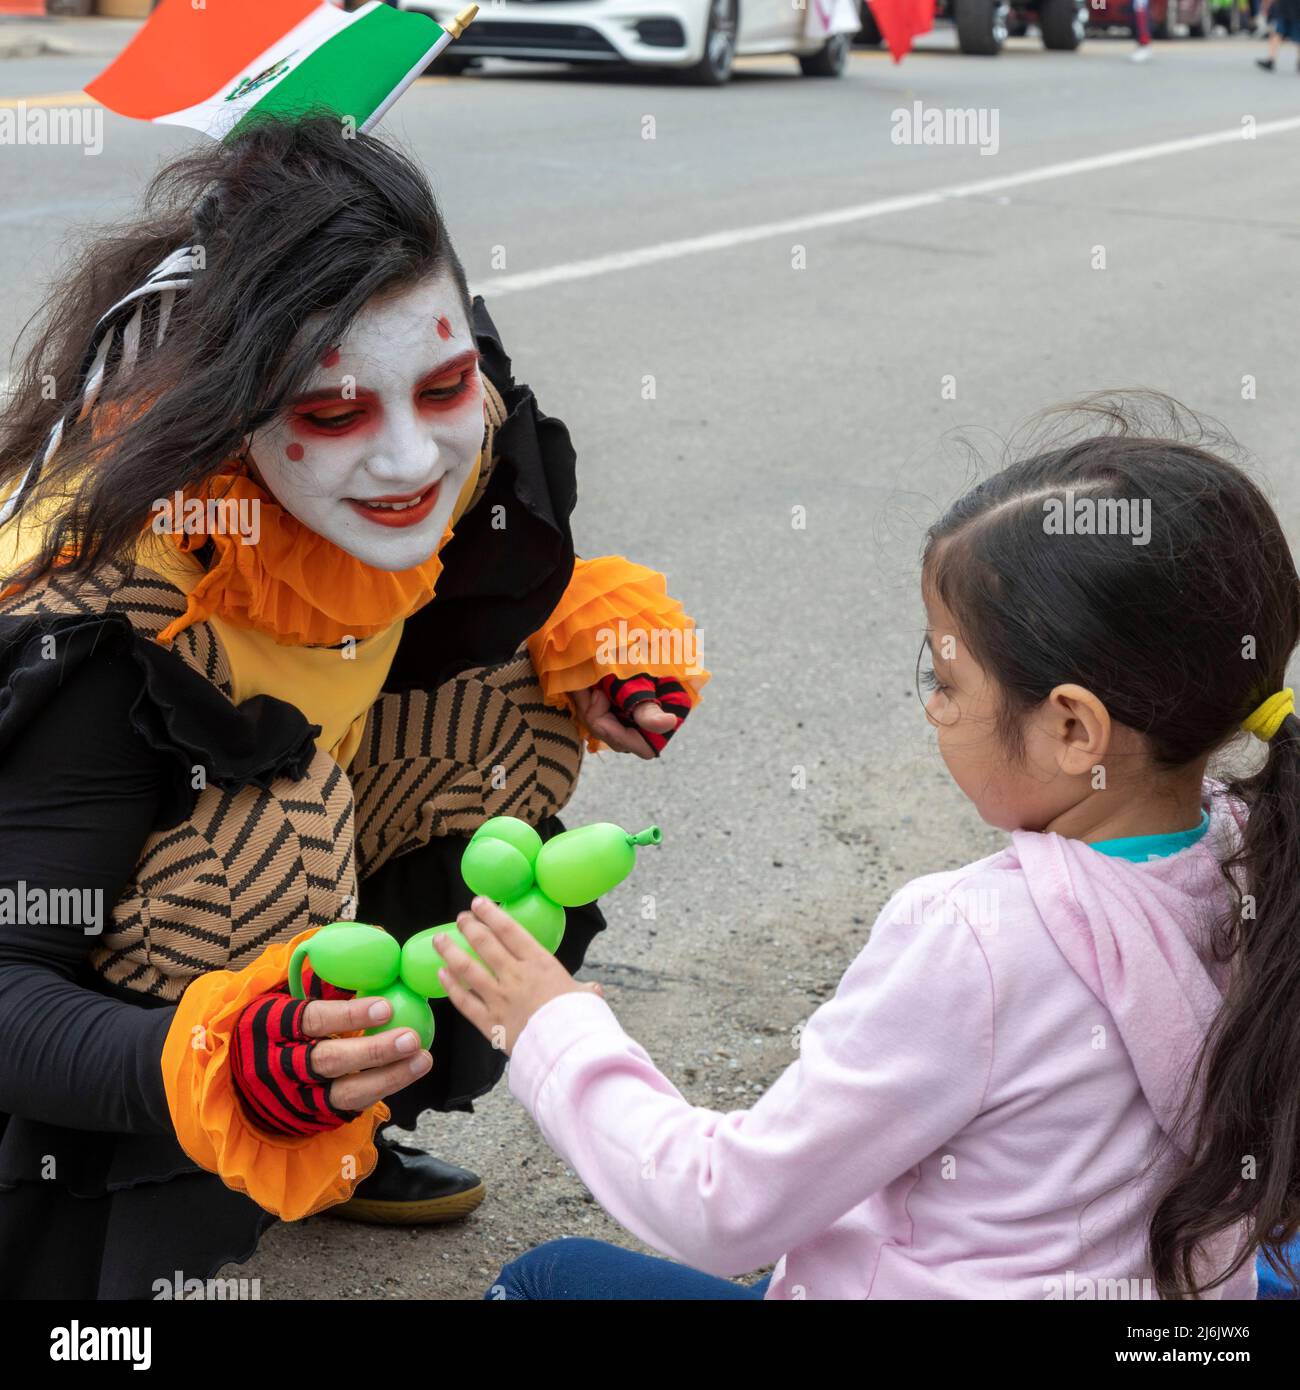 Detroit, Michigan USA - 1 May 2022 - A clown makes a balloon toy for a girl watching the Cinco de Mayo parade in Detroit's Mexican-American neighborhood. The annual parade returned in 2022 after a two-year hiatus due to the pandemic. Cinco de Mayo celebrates a Mexican victory over the French on May 5, 1862. Credit: Jim West/Alamy Live News Stock Photo